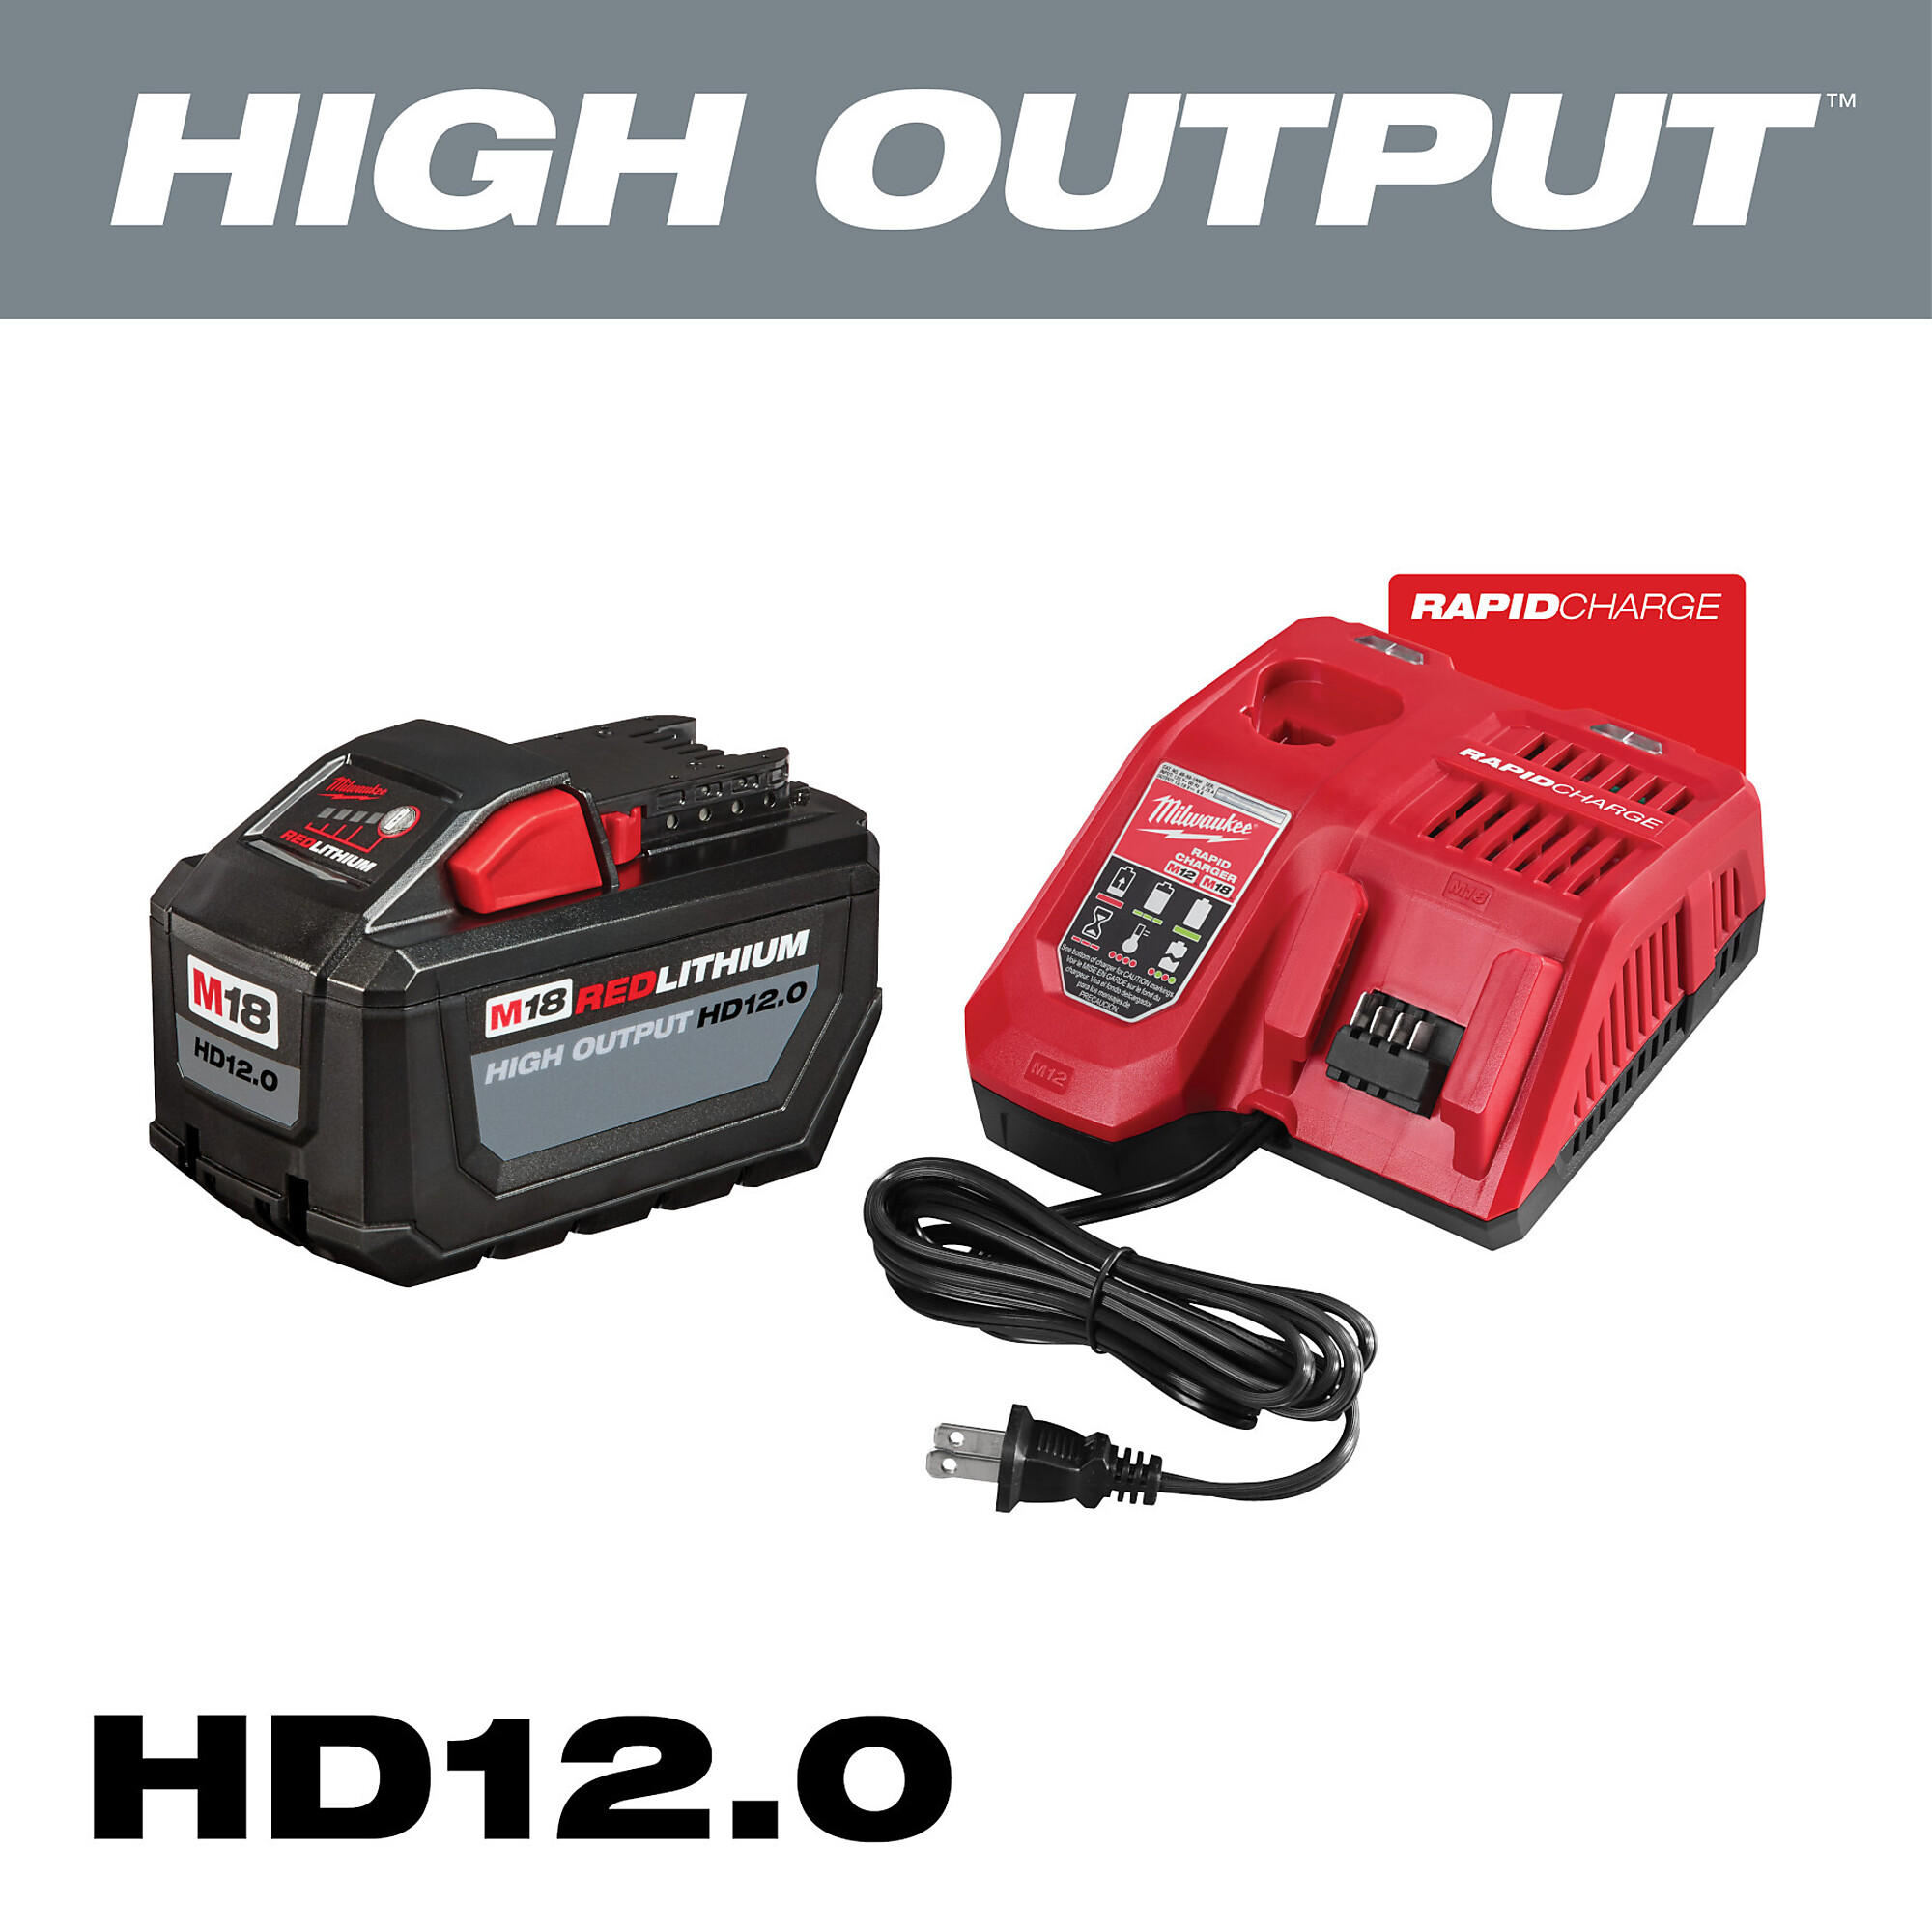 Milwaukee M18 REDLITHIUM High Output HD12.0 Battery Pack and Multi-Voltage  Charger, Model# 48-59-1200 Northern Tool